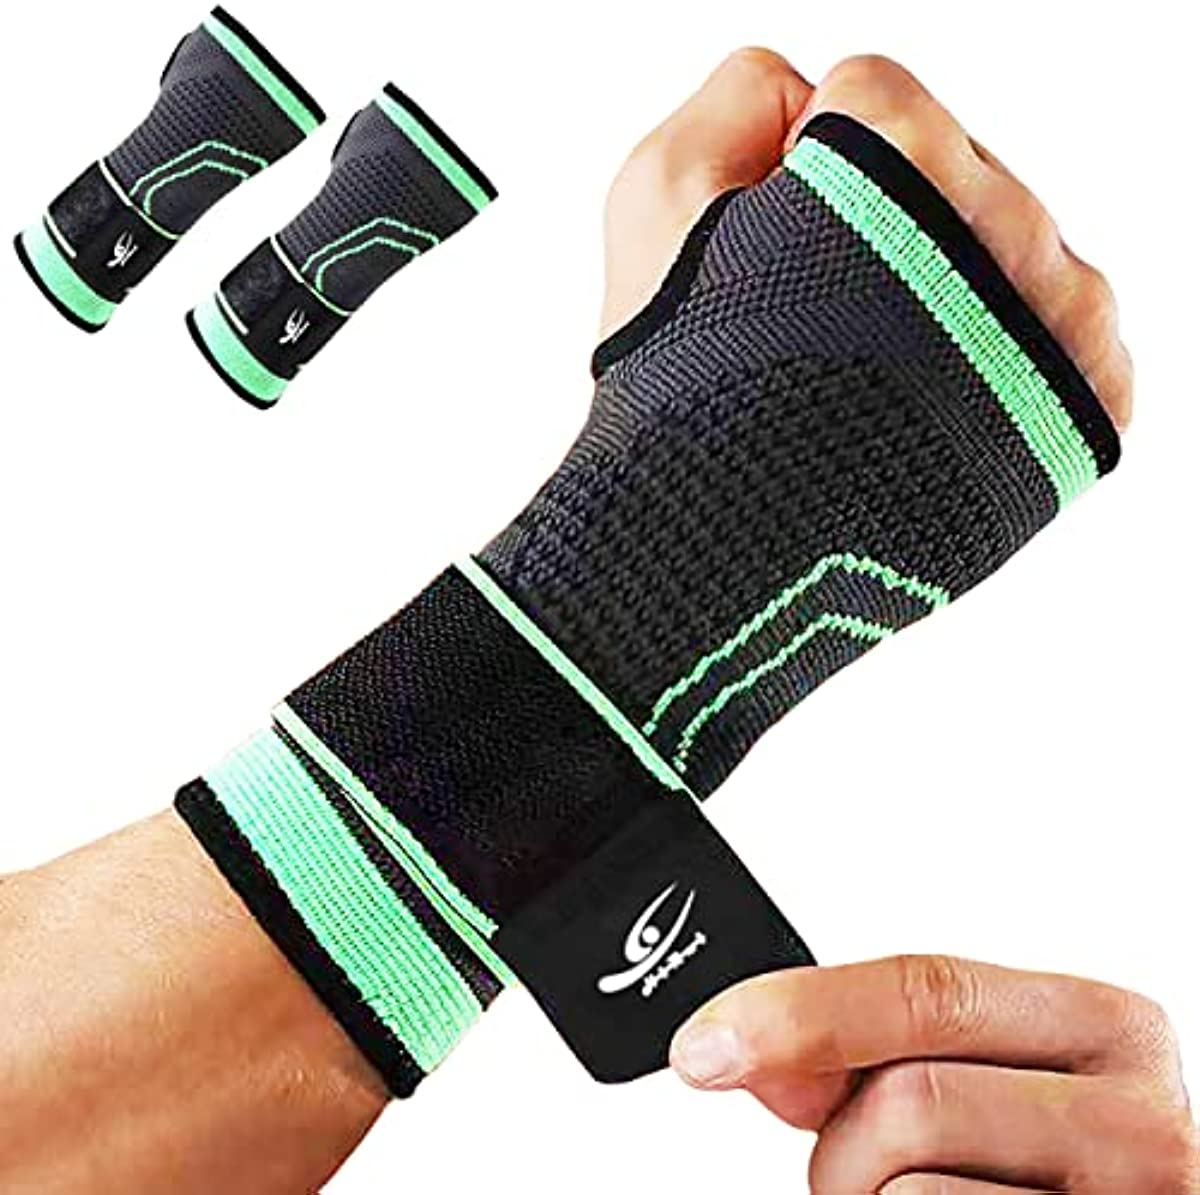 HiRui 2-Pack Wrist Brace Wrist Wrap, Wrist Strap Hand Compression Sleeves Support for Fitness Weightlifting MTB Tendonitis Sprains Recovery, Carpal Tunnel Arthritis, Pain Relief (Green, Medium)